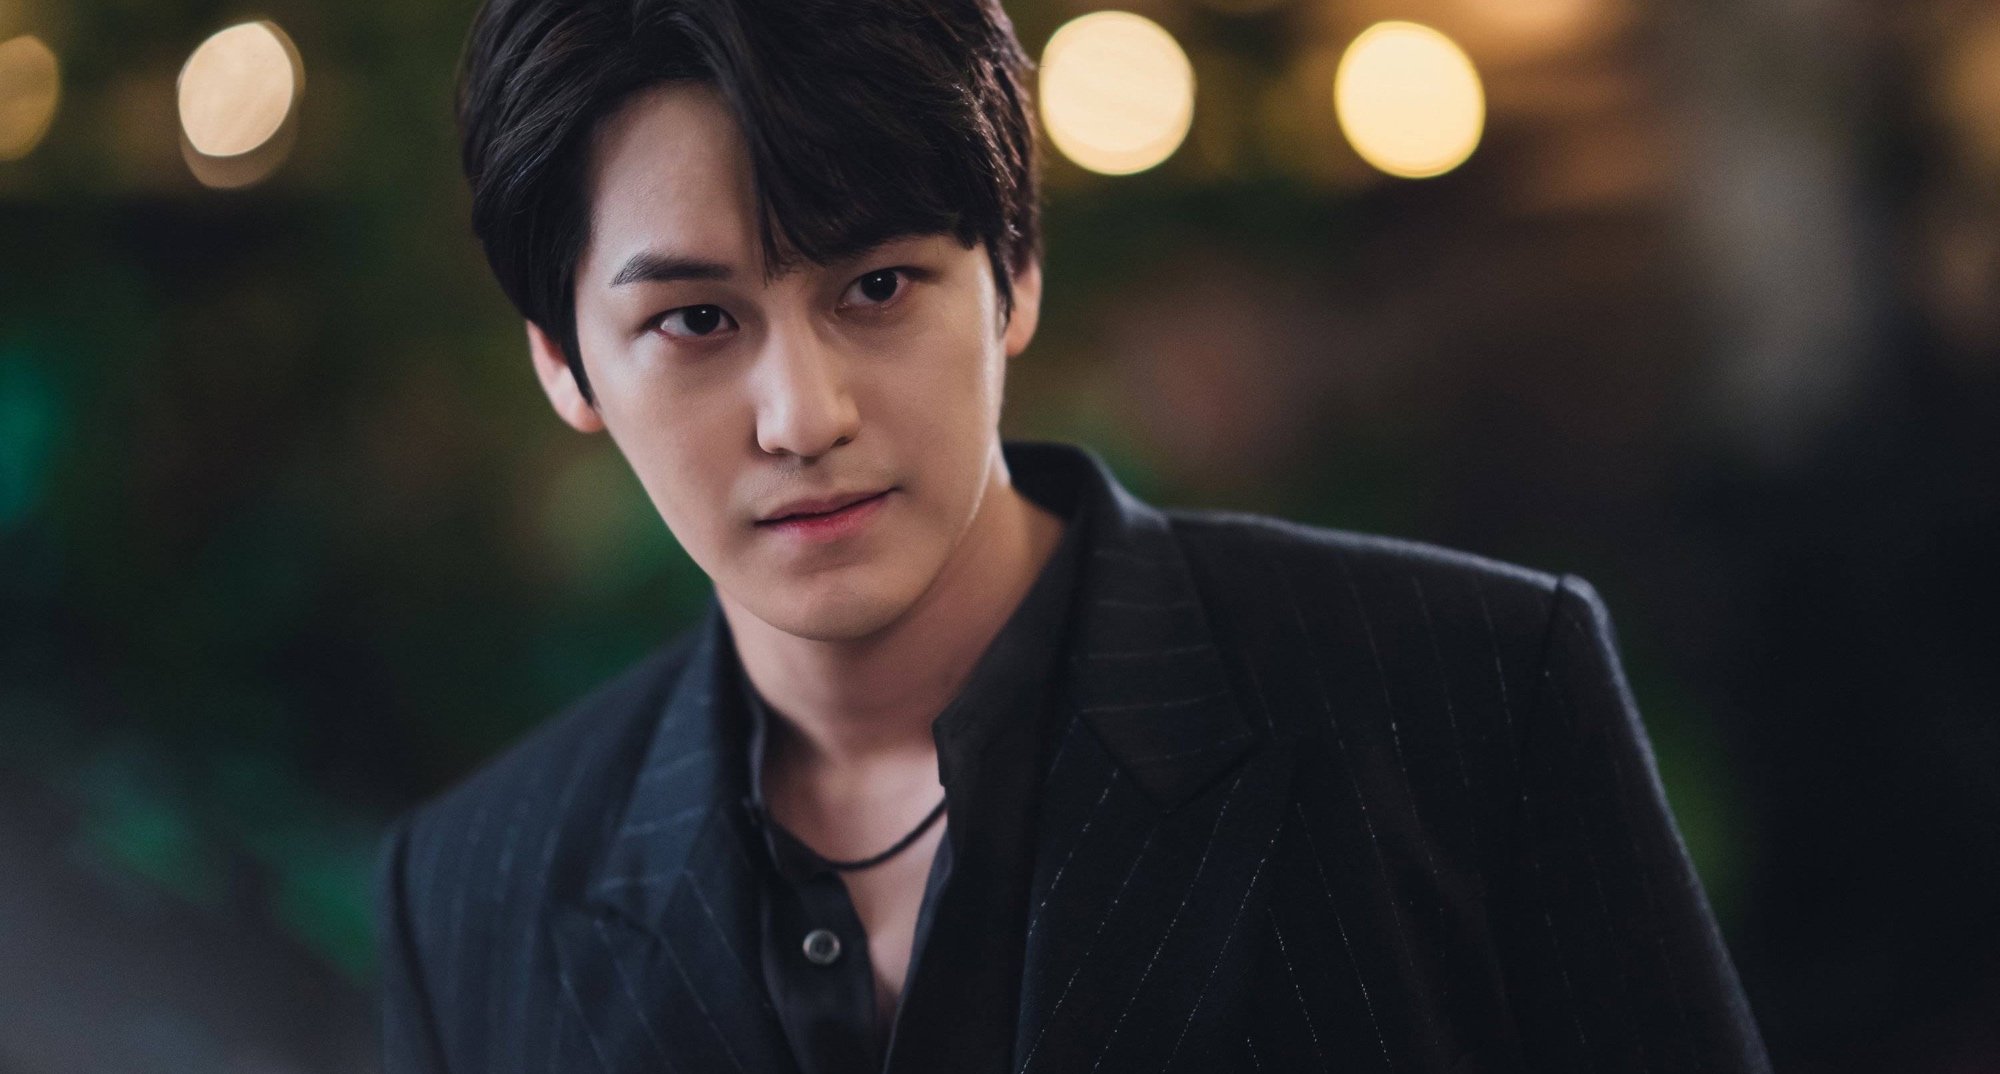 Kim Bum as Lee Rang in 'Tale of the Nine-Tailed' K-drama wearing black suit.